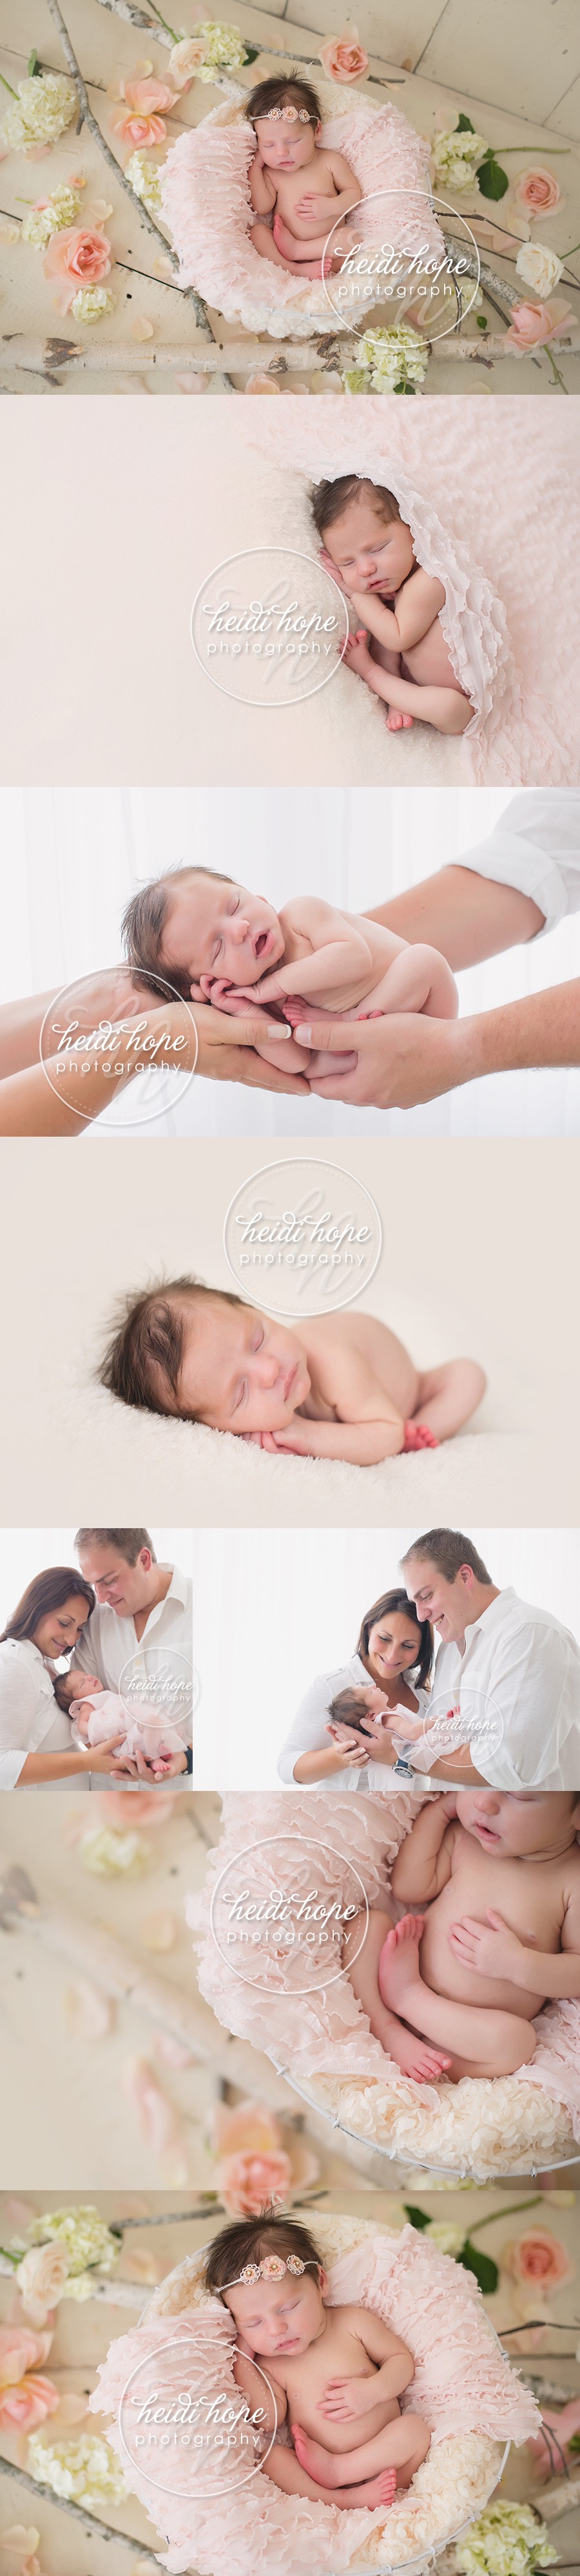 newborn baby girl with pink flowers